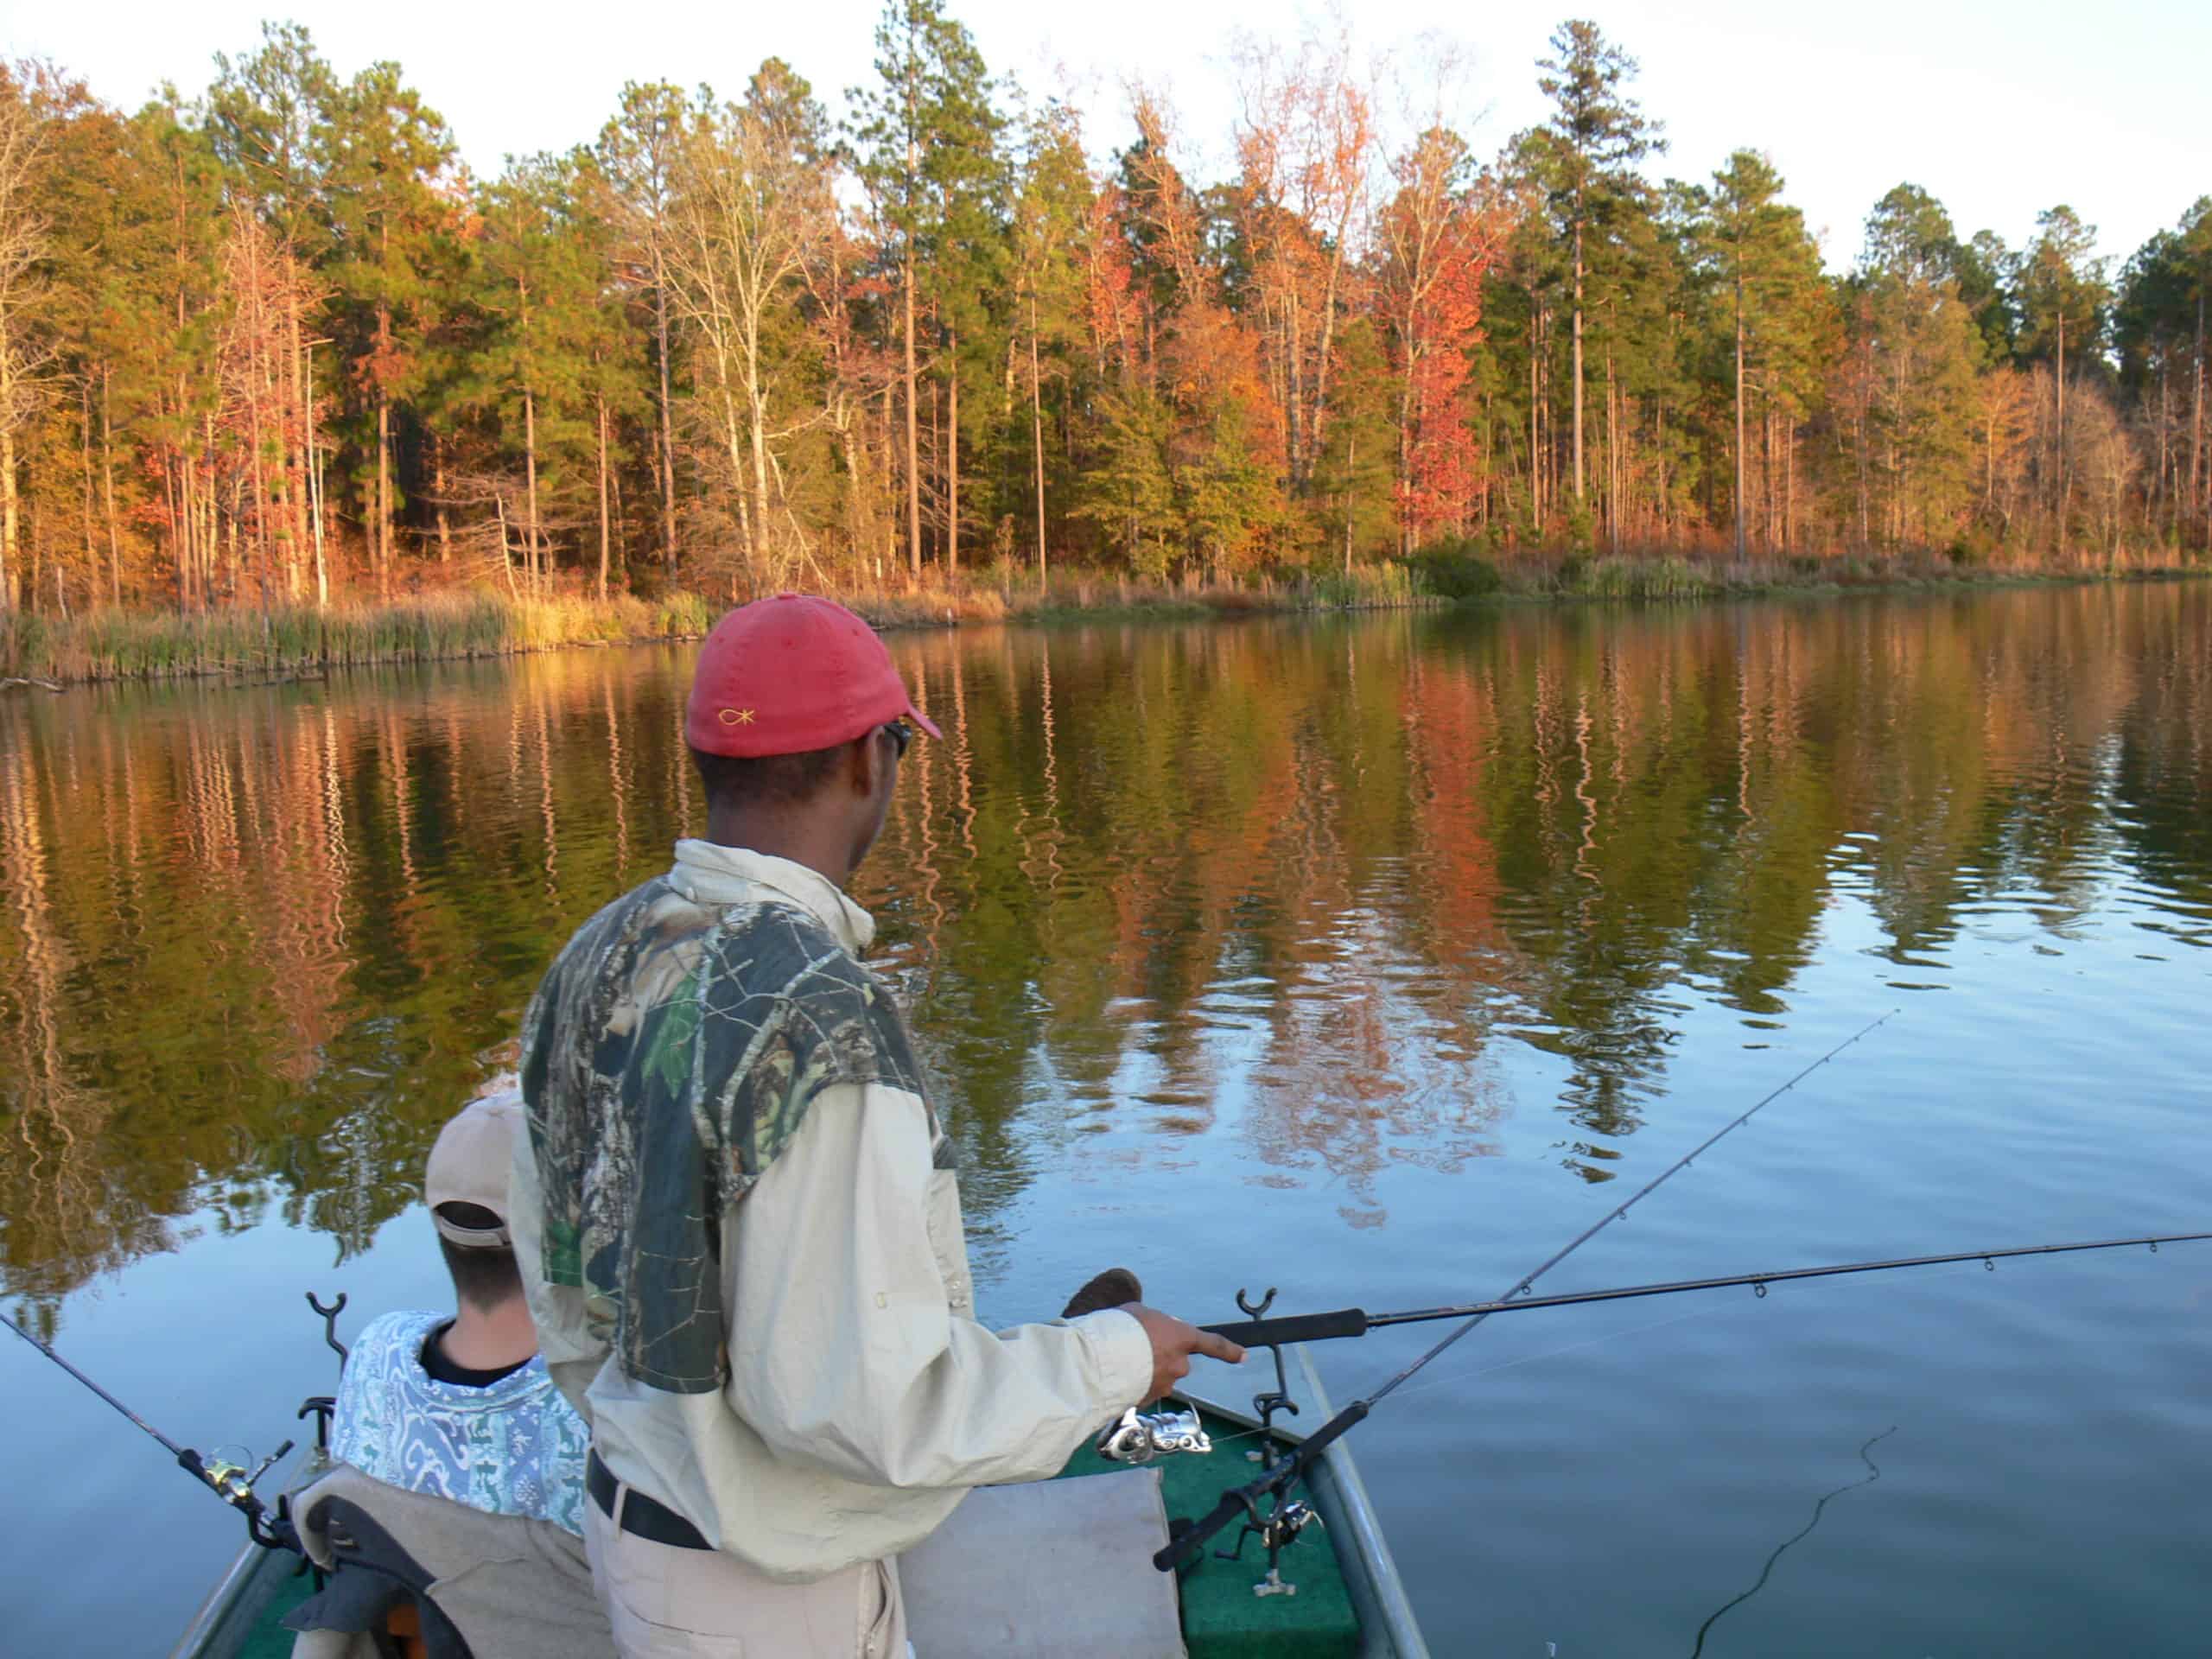 The tools needed for effective longline trolling are several crappie-sized rods and reels, a good trolling motor, a GPS unit, a box of jig heads and bodies, and a keen desire to put together the puzzle of speed, depth, jig head size and body color.    